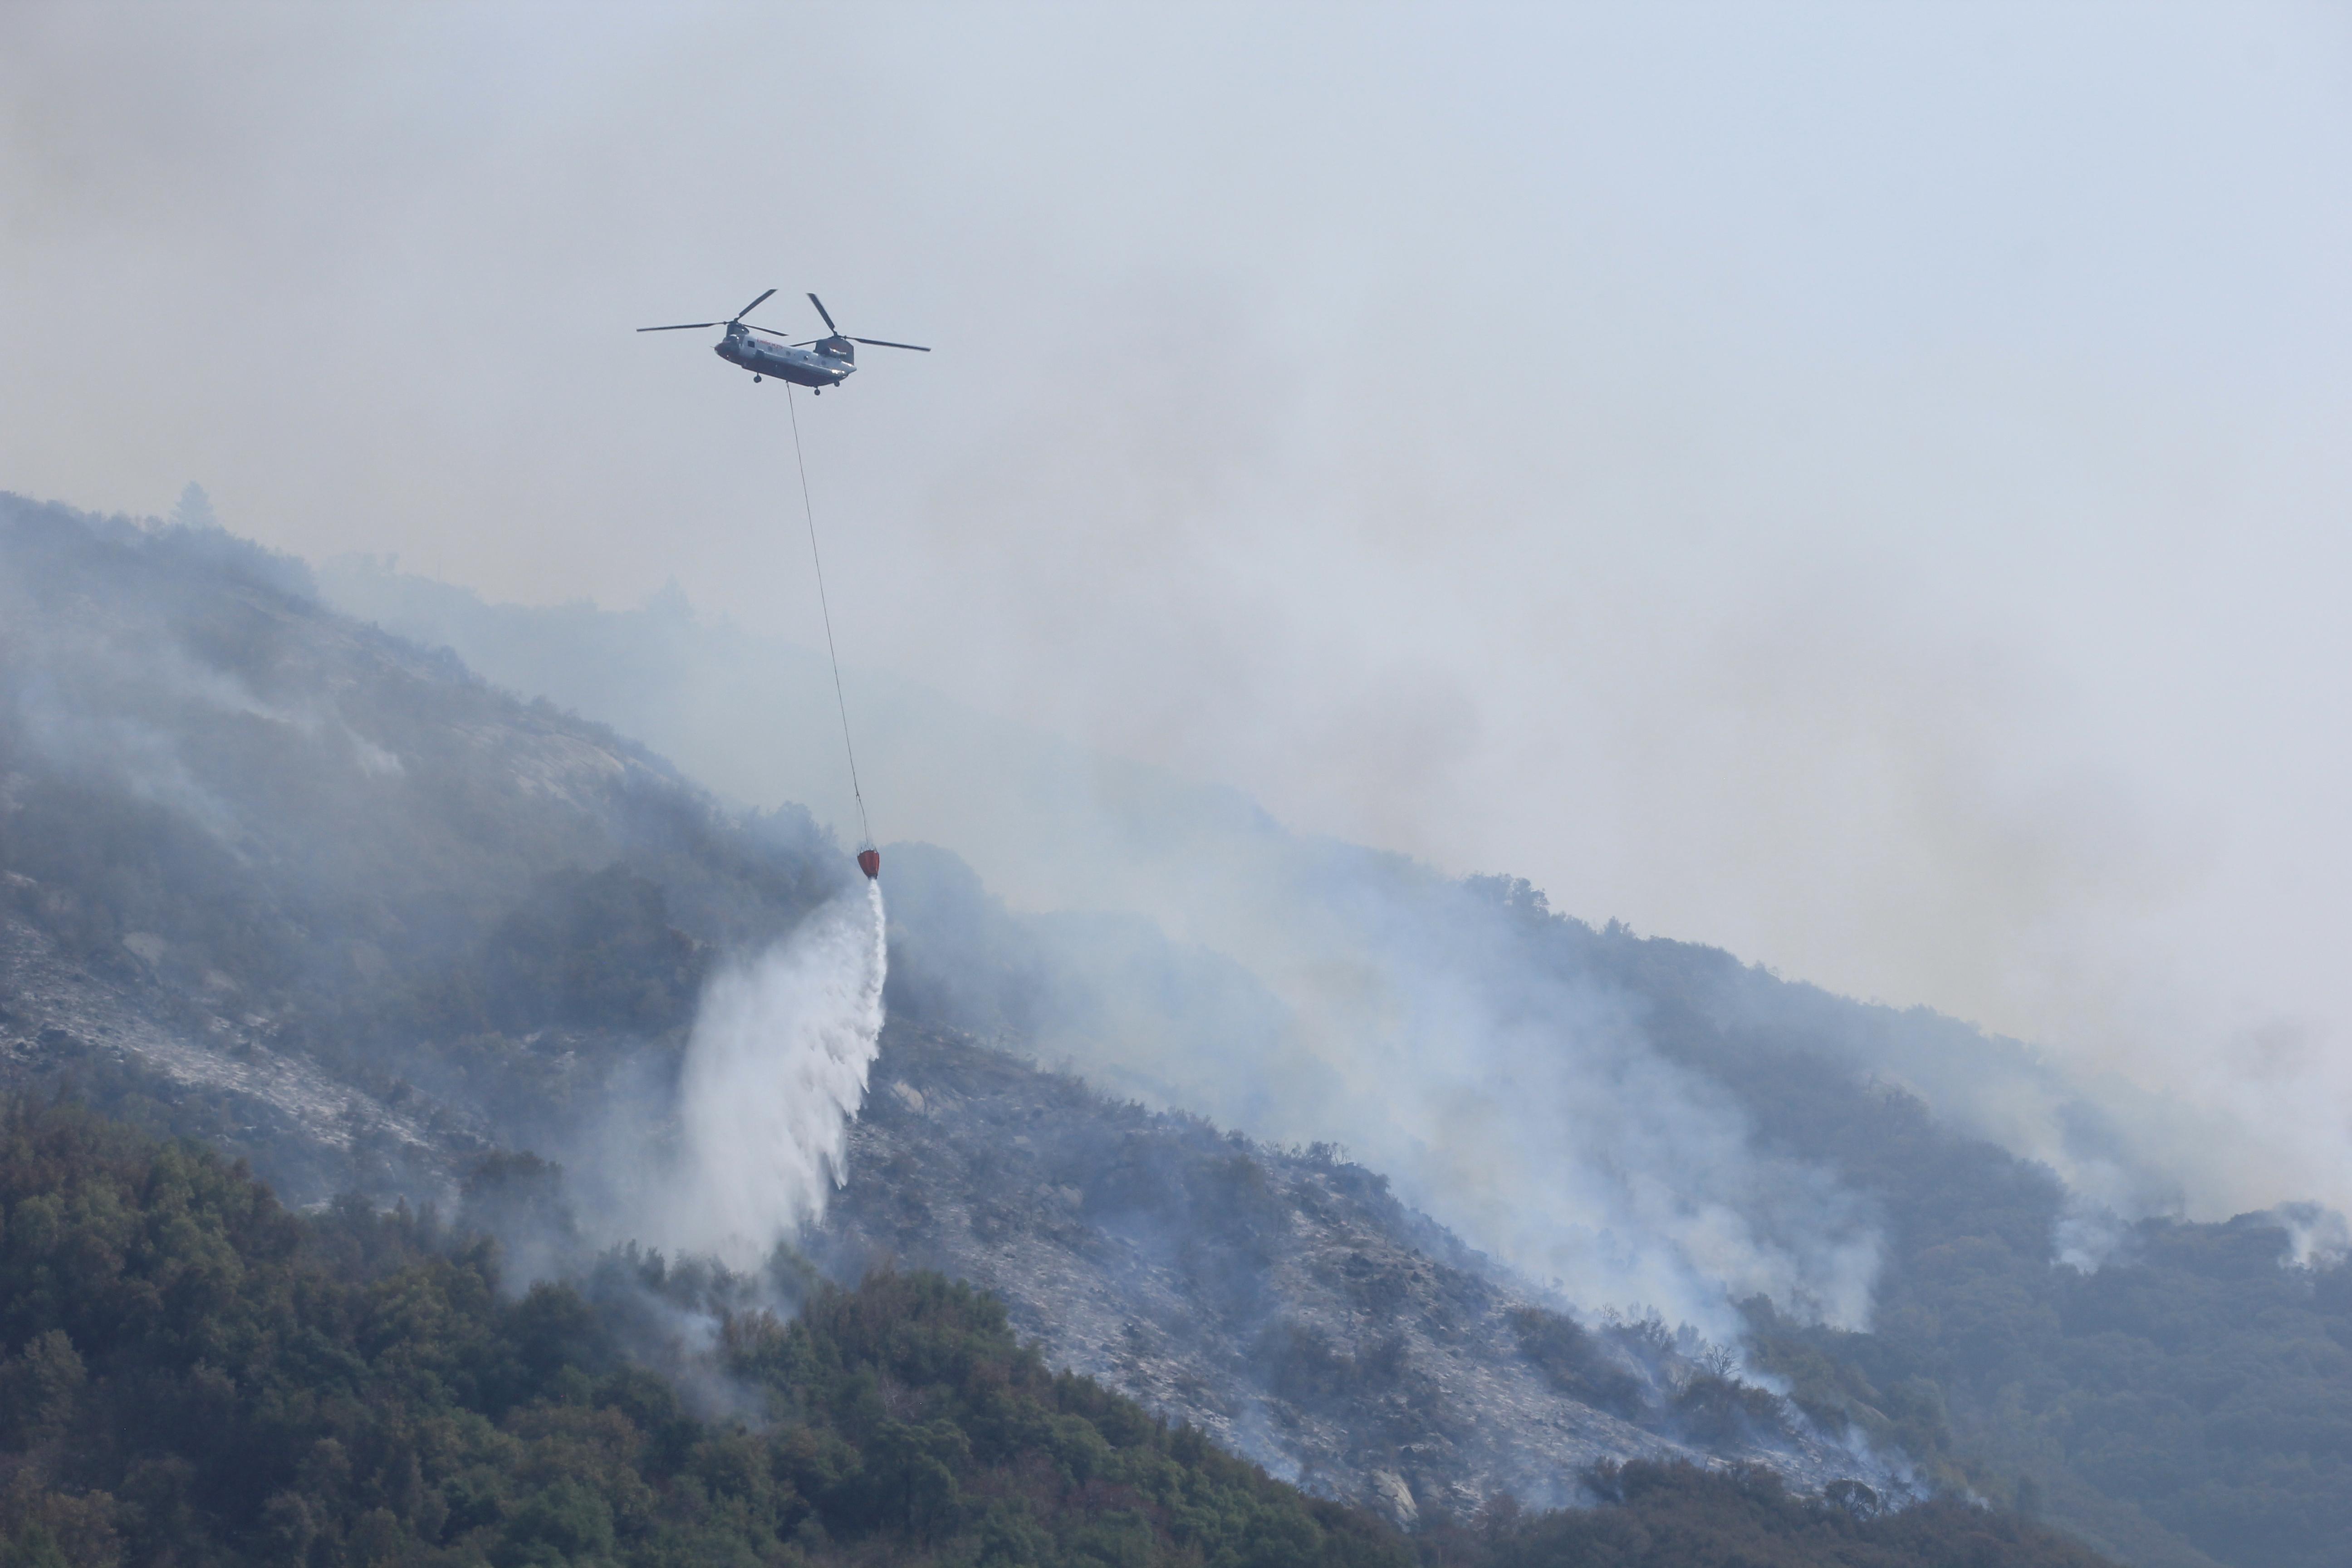 A grey Chinook helicopter drops water on the fireline high up on Paradise ridge